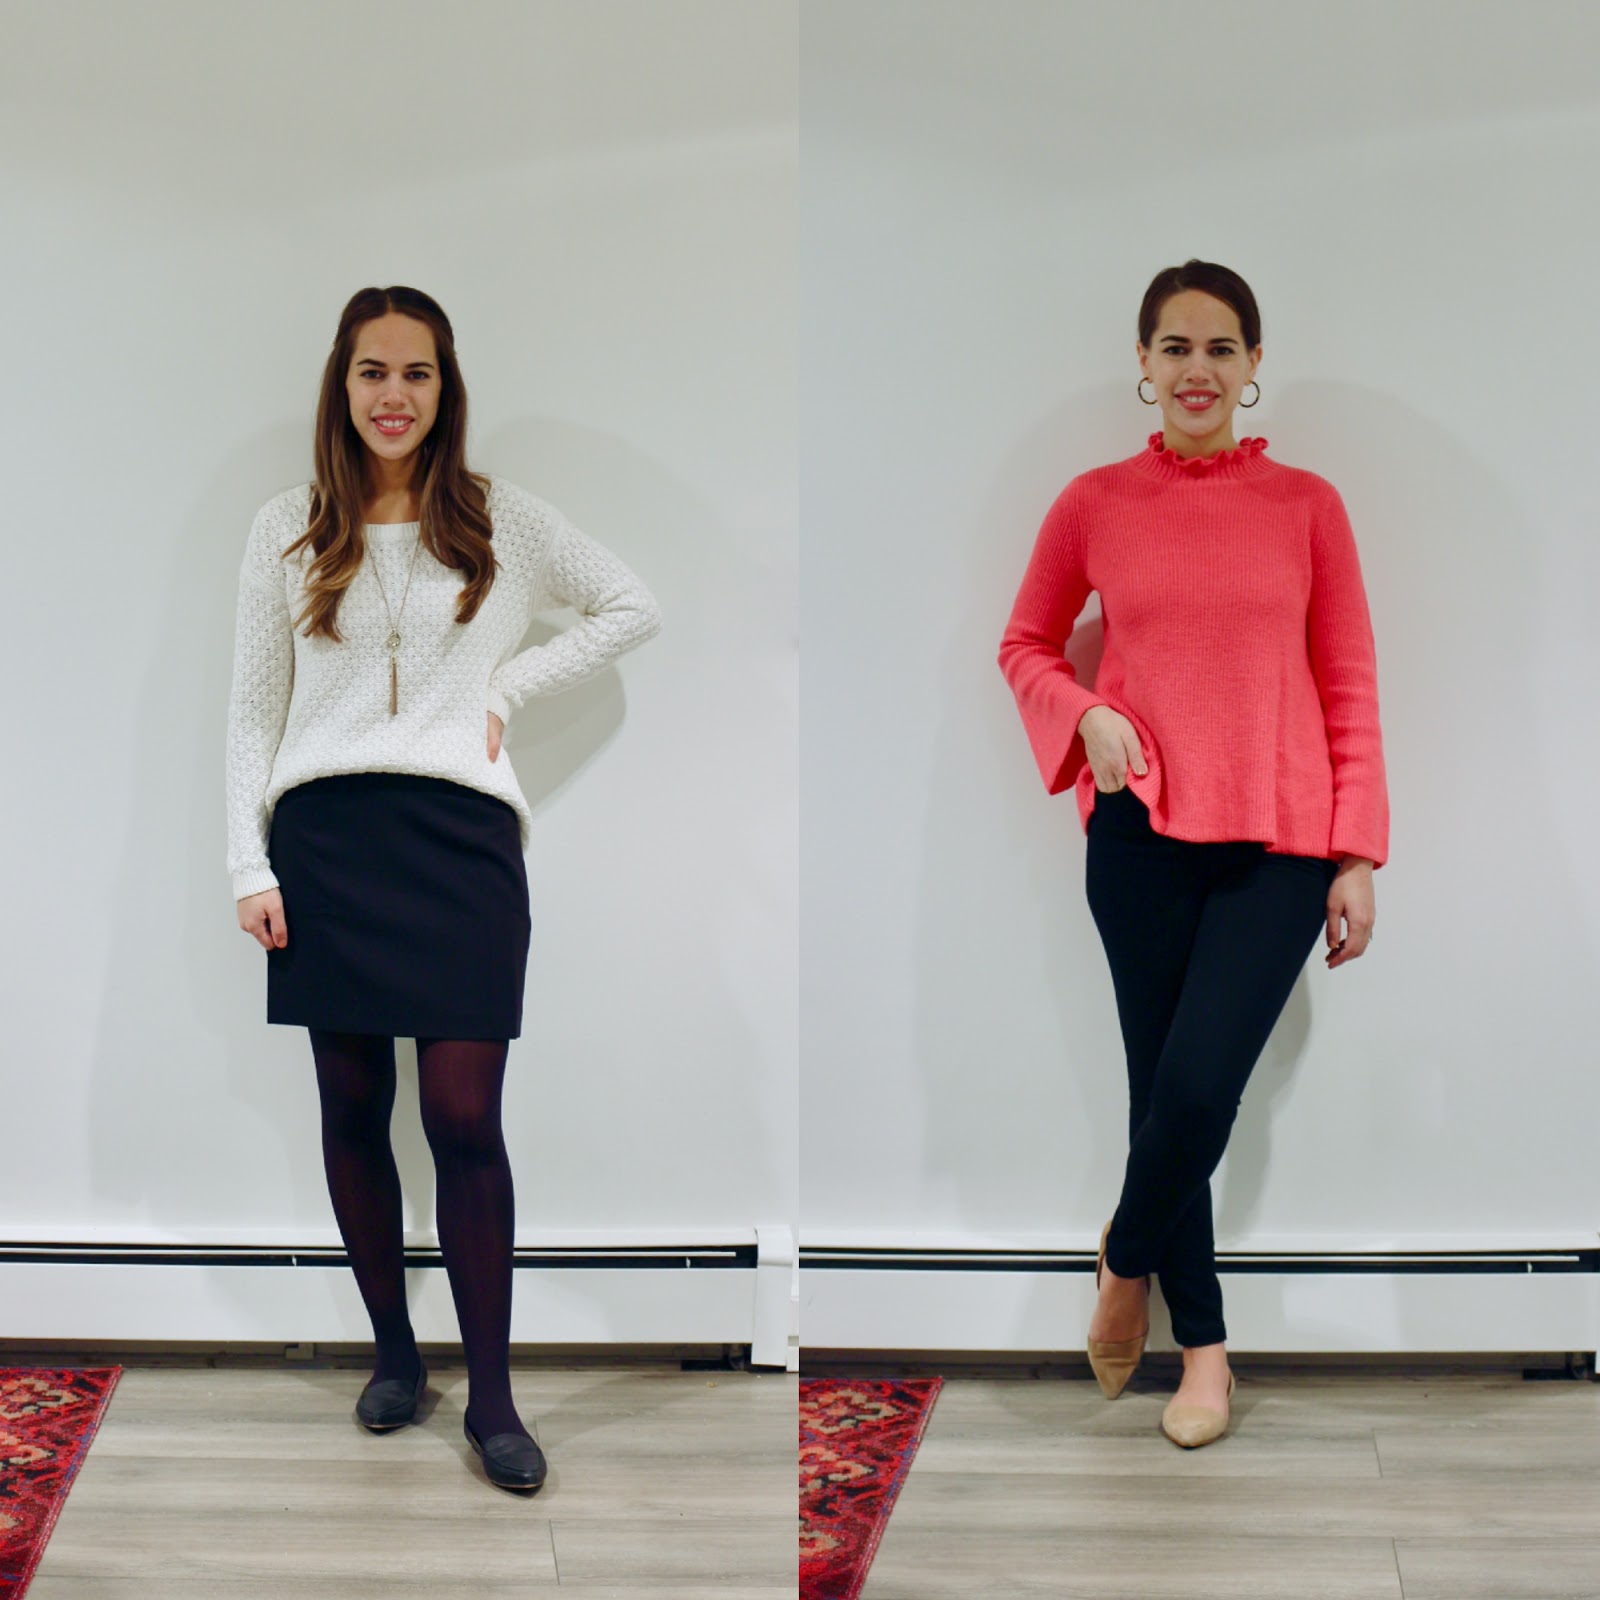 Jules in Flats October Outfits (Business Casual Fall Workwear on a Budget)